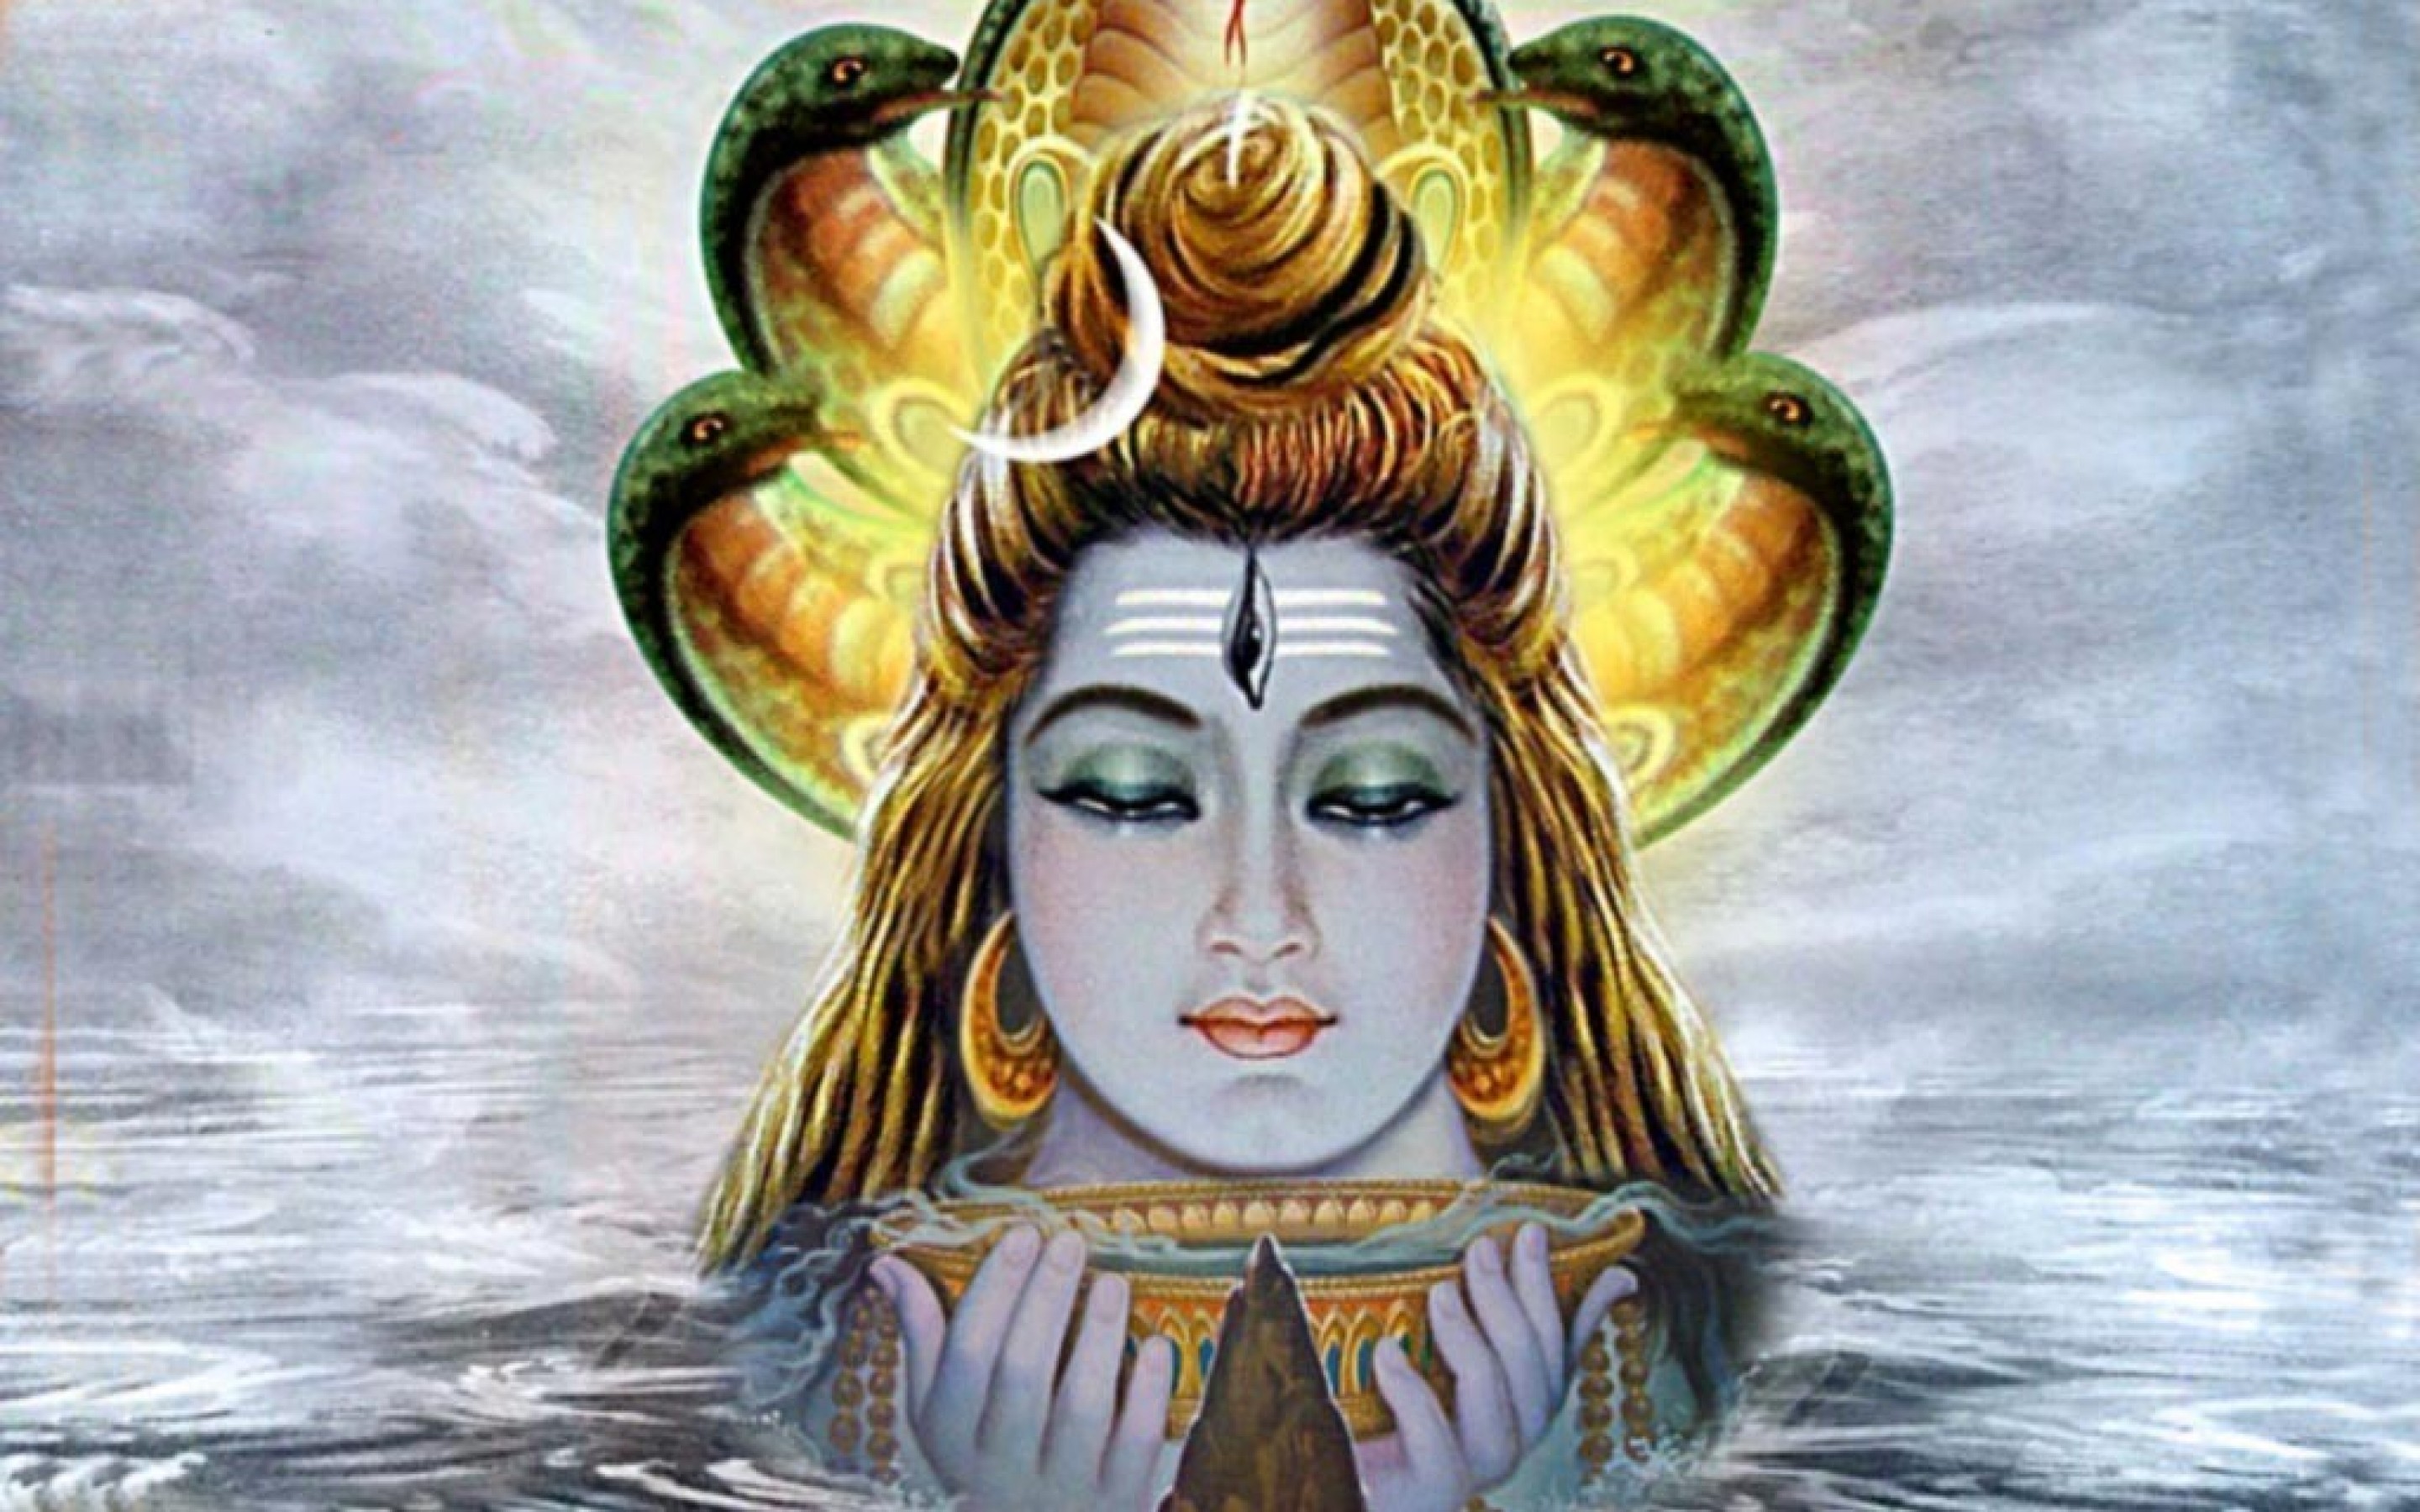 Amazing Lord Shiva Wallpapers (1080P HD Pics & Images)